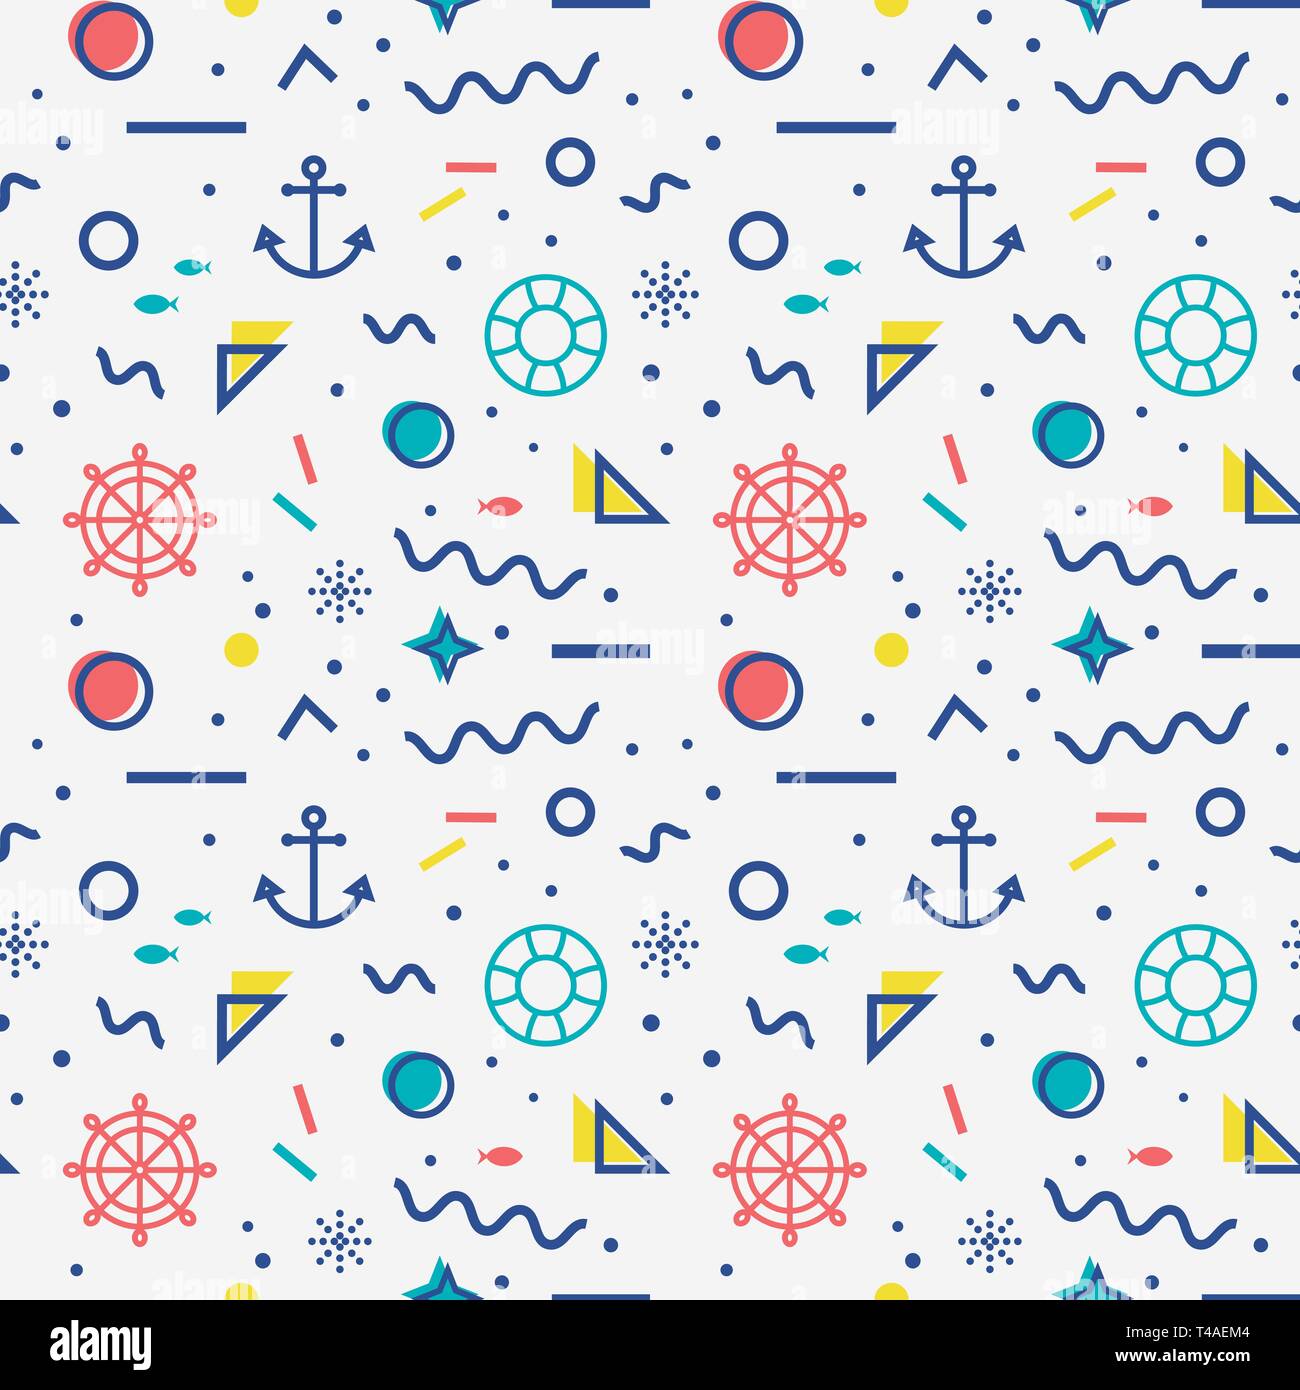 Nautical seamless pattern with anchors, steering wheels, lifebelts, fishes and with abstract geometric shapes in memphis style. Vector background. Stock Vector